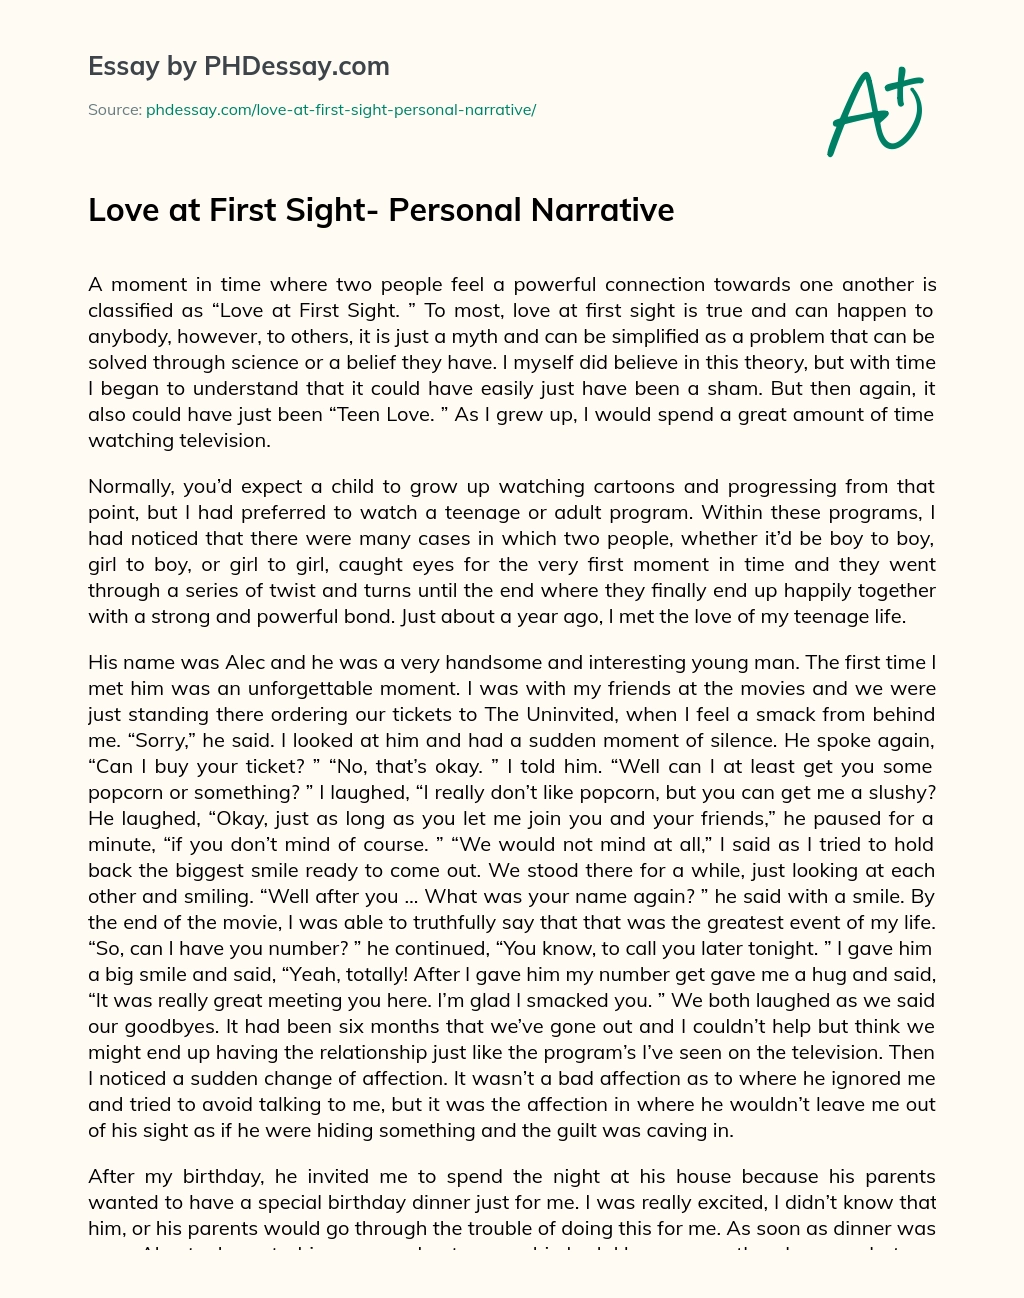 Love at First Sight- Personal Narrative essay